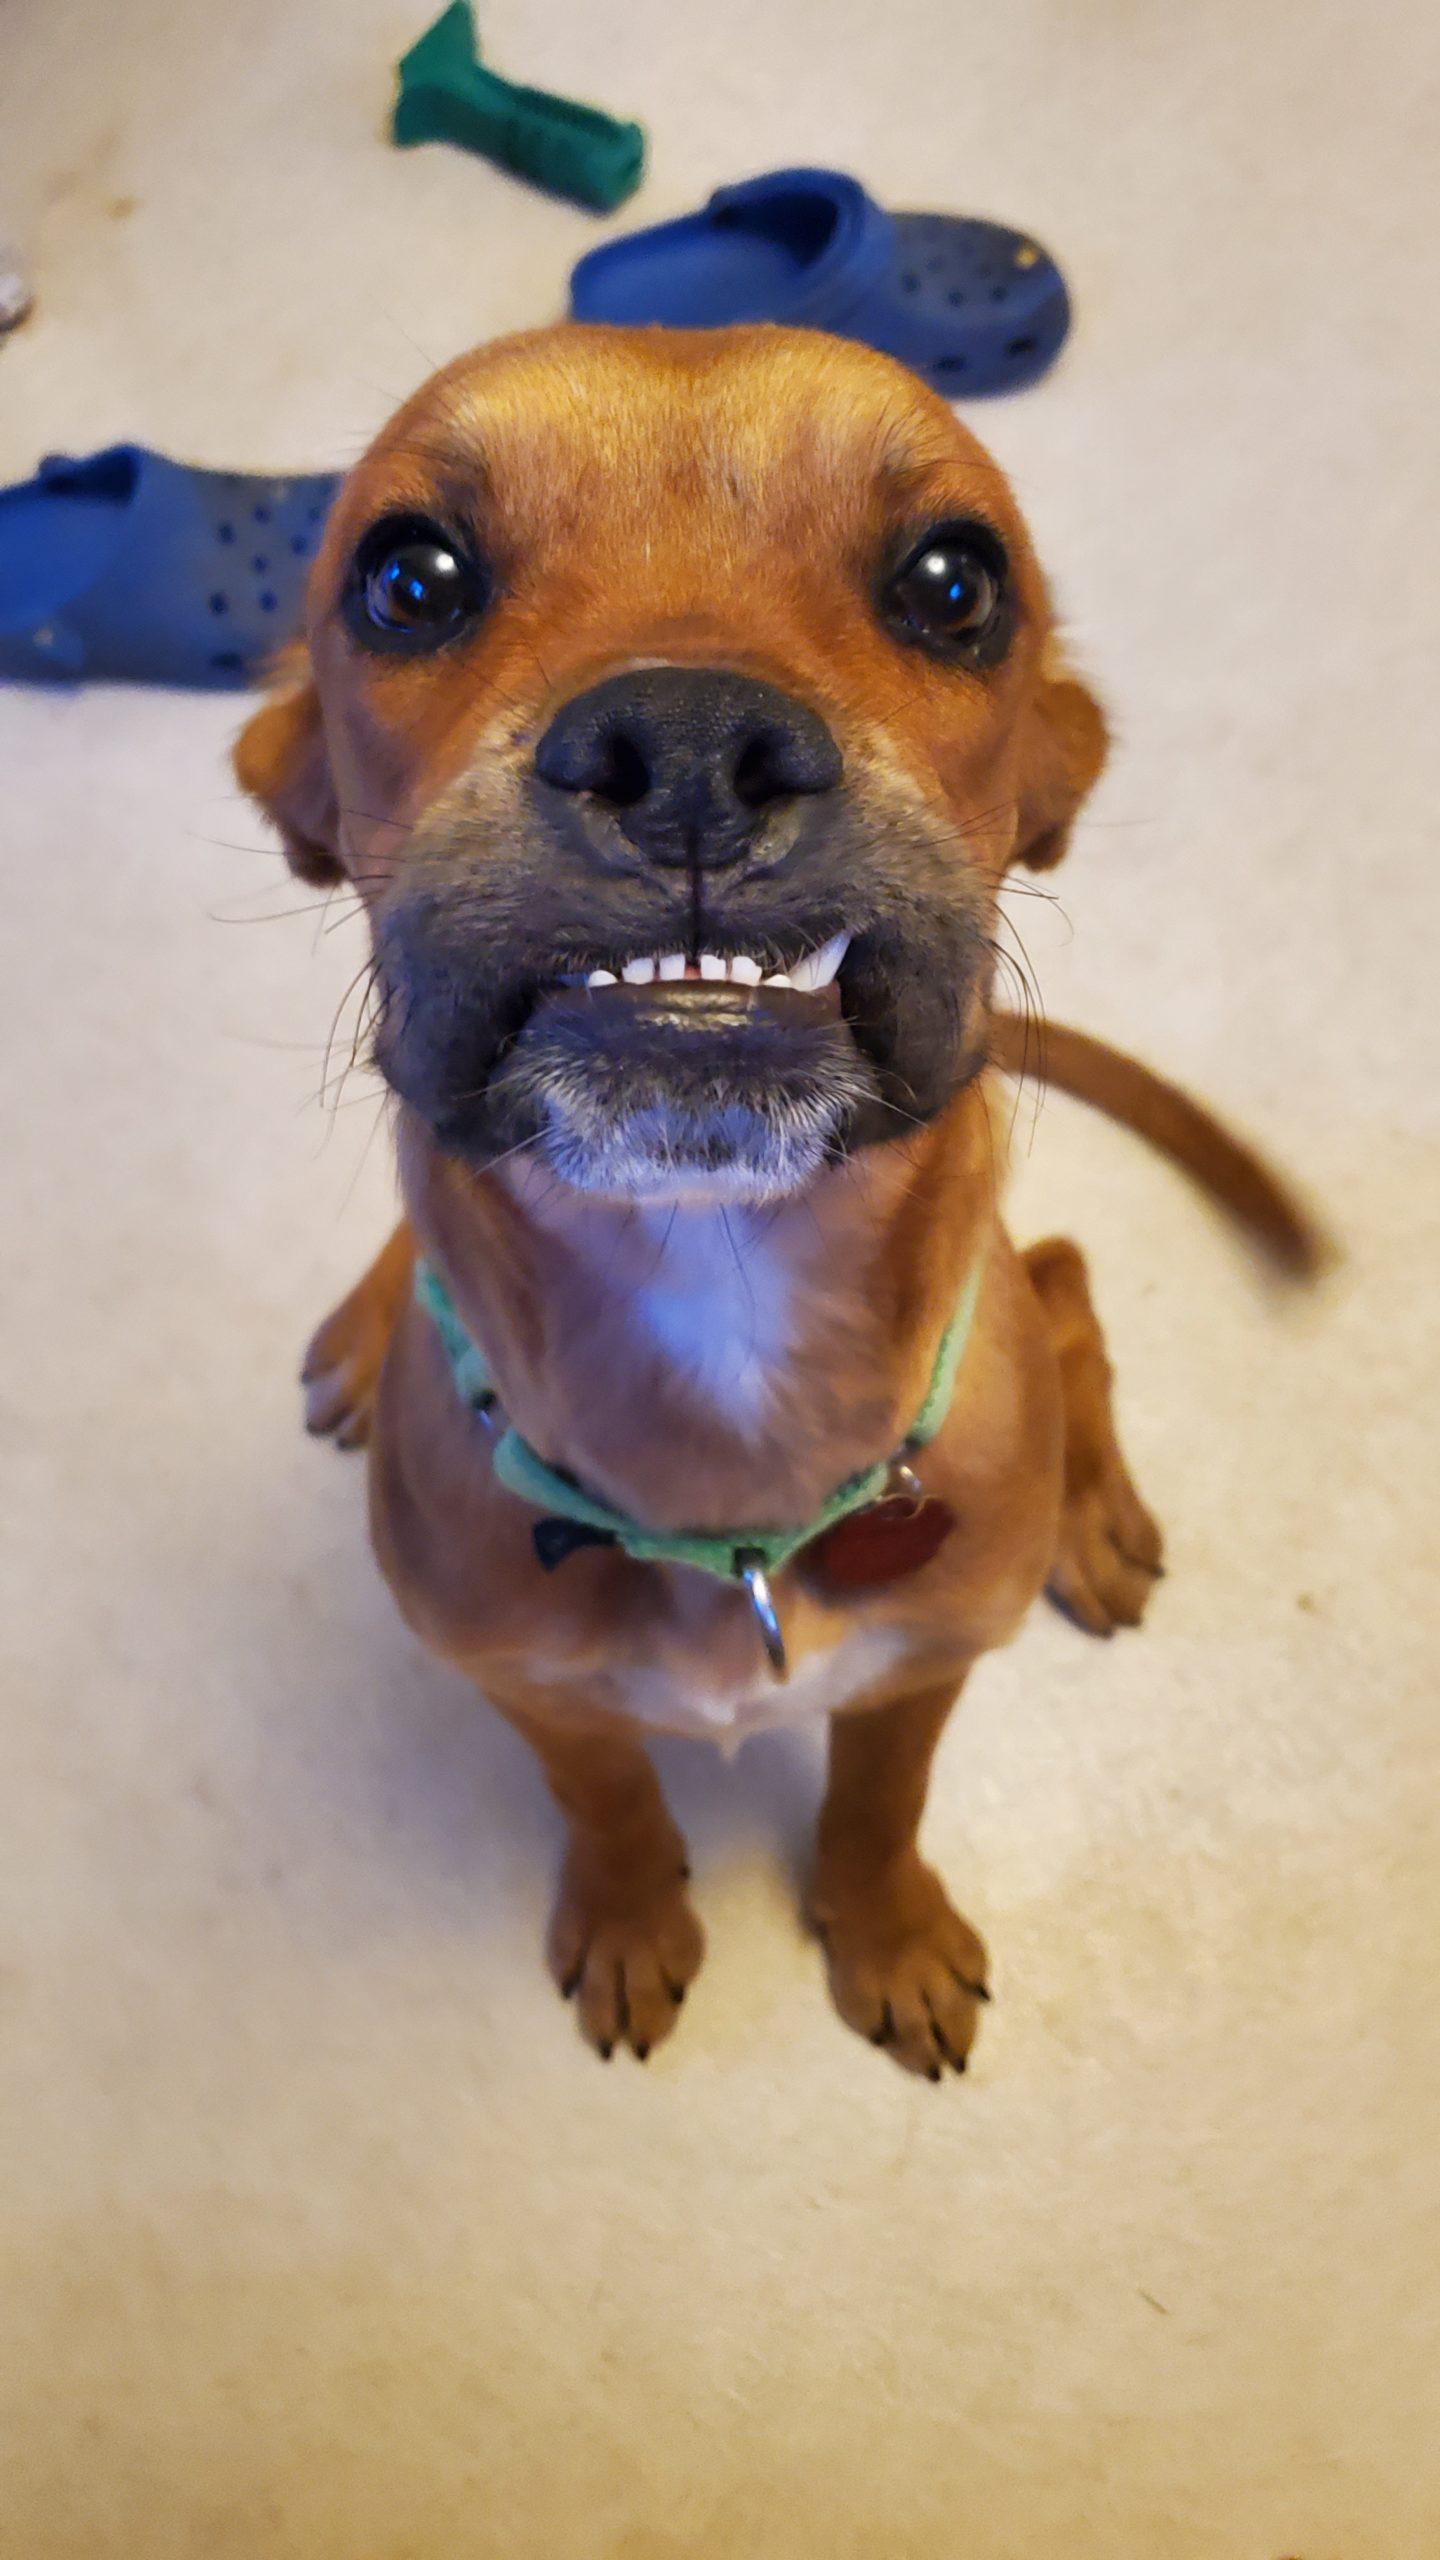 A brown dog stares directly at the camera with a huge toothy mouth.